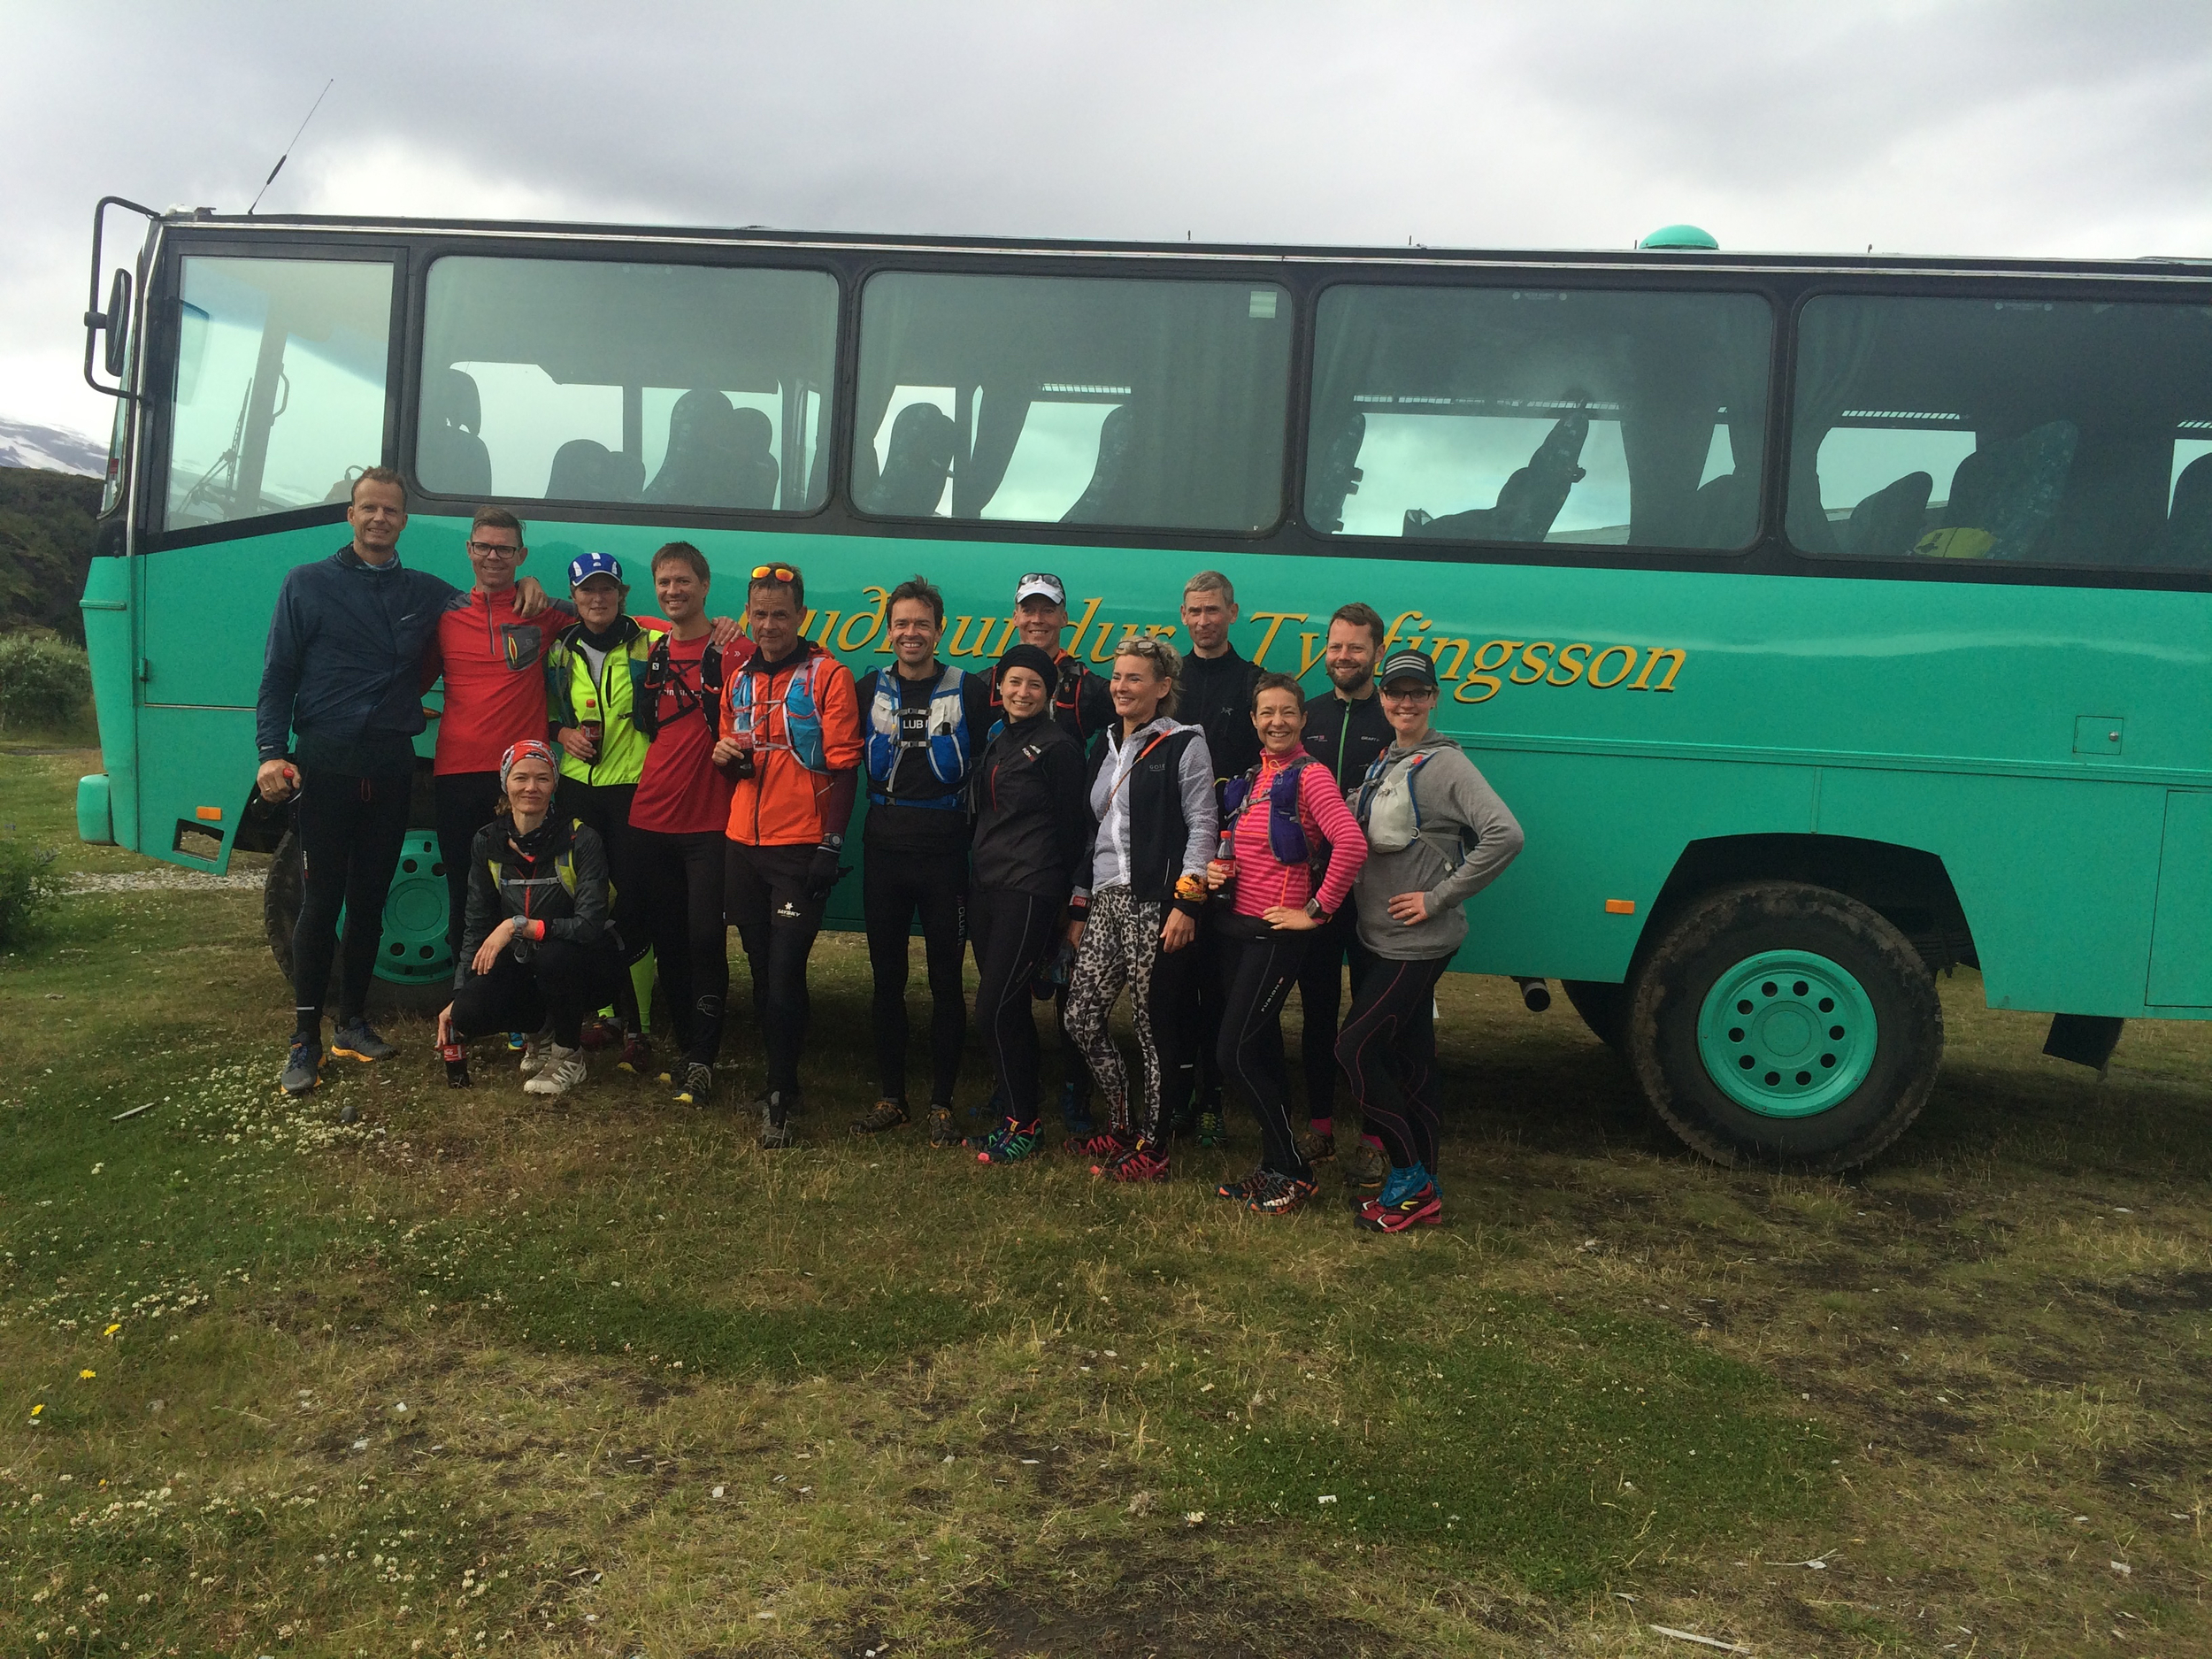 A running group in front of a bus